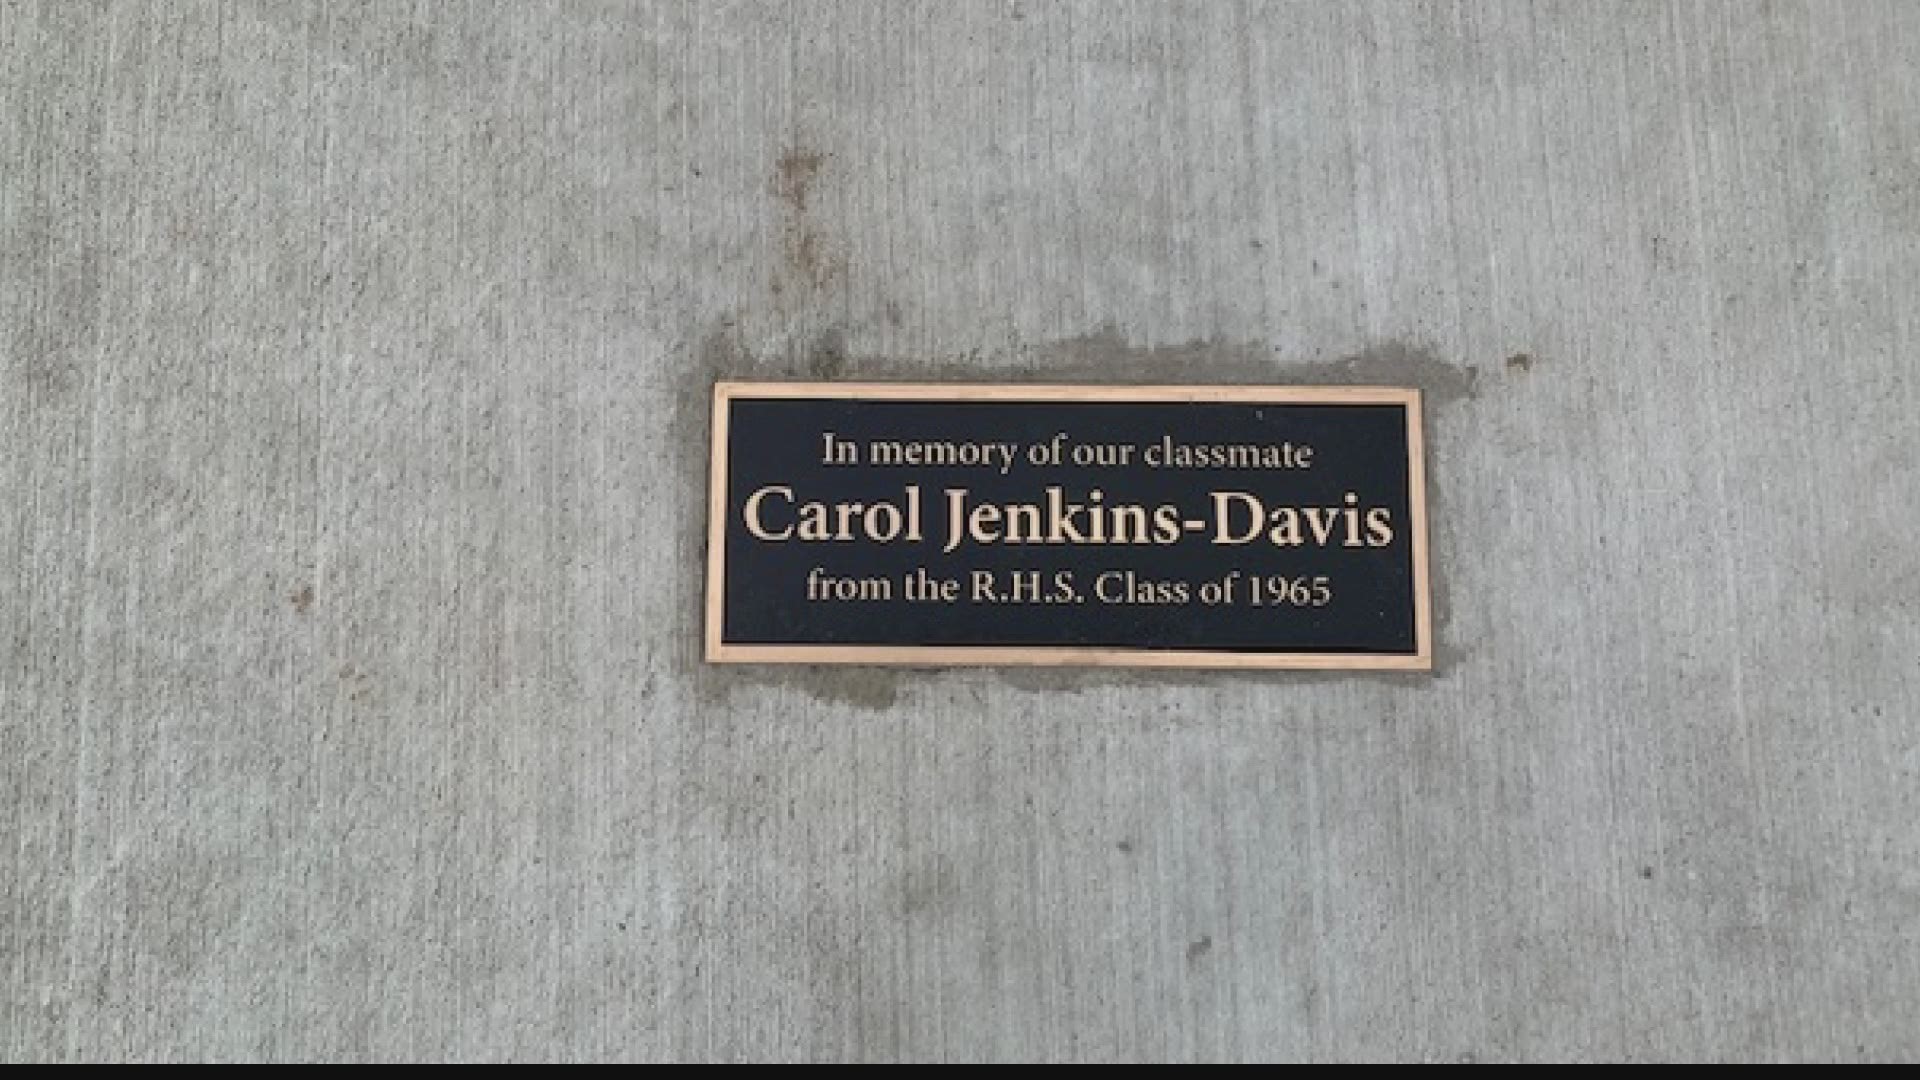 Leaders in Rushville dedicated a park to honor Carol Jenkins-Davis and promote diversity and inclusion.